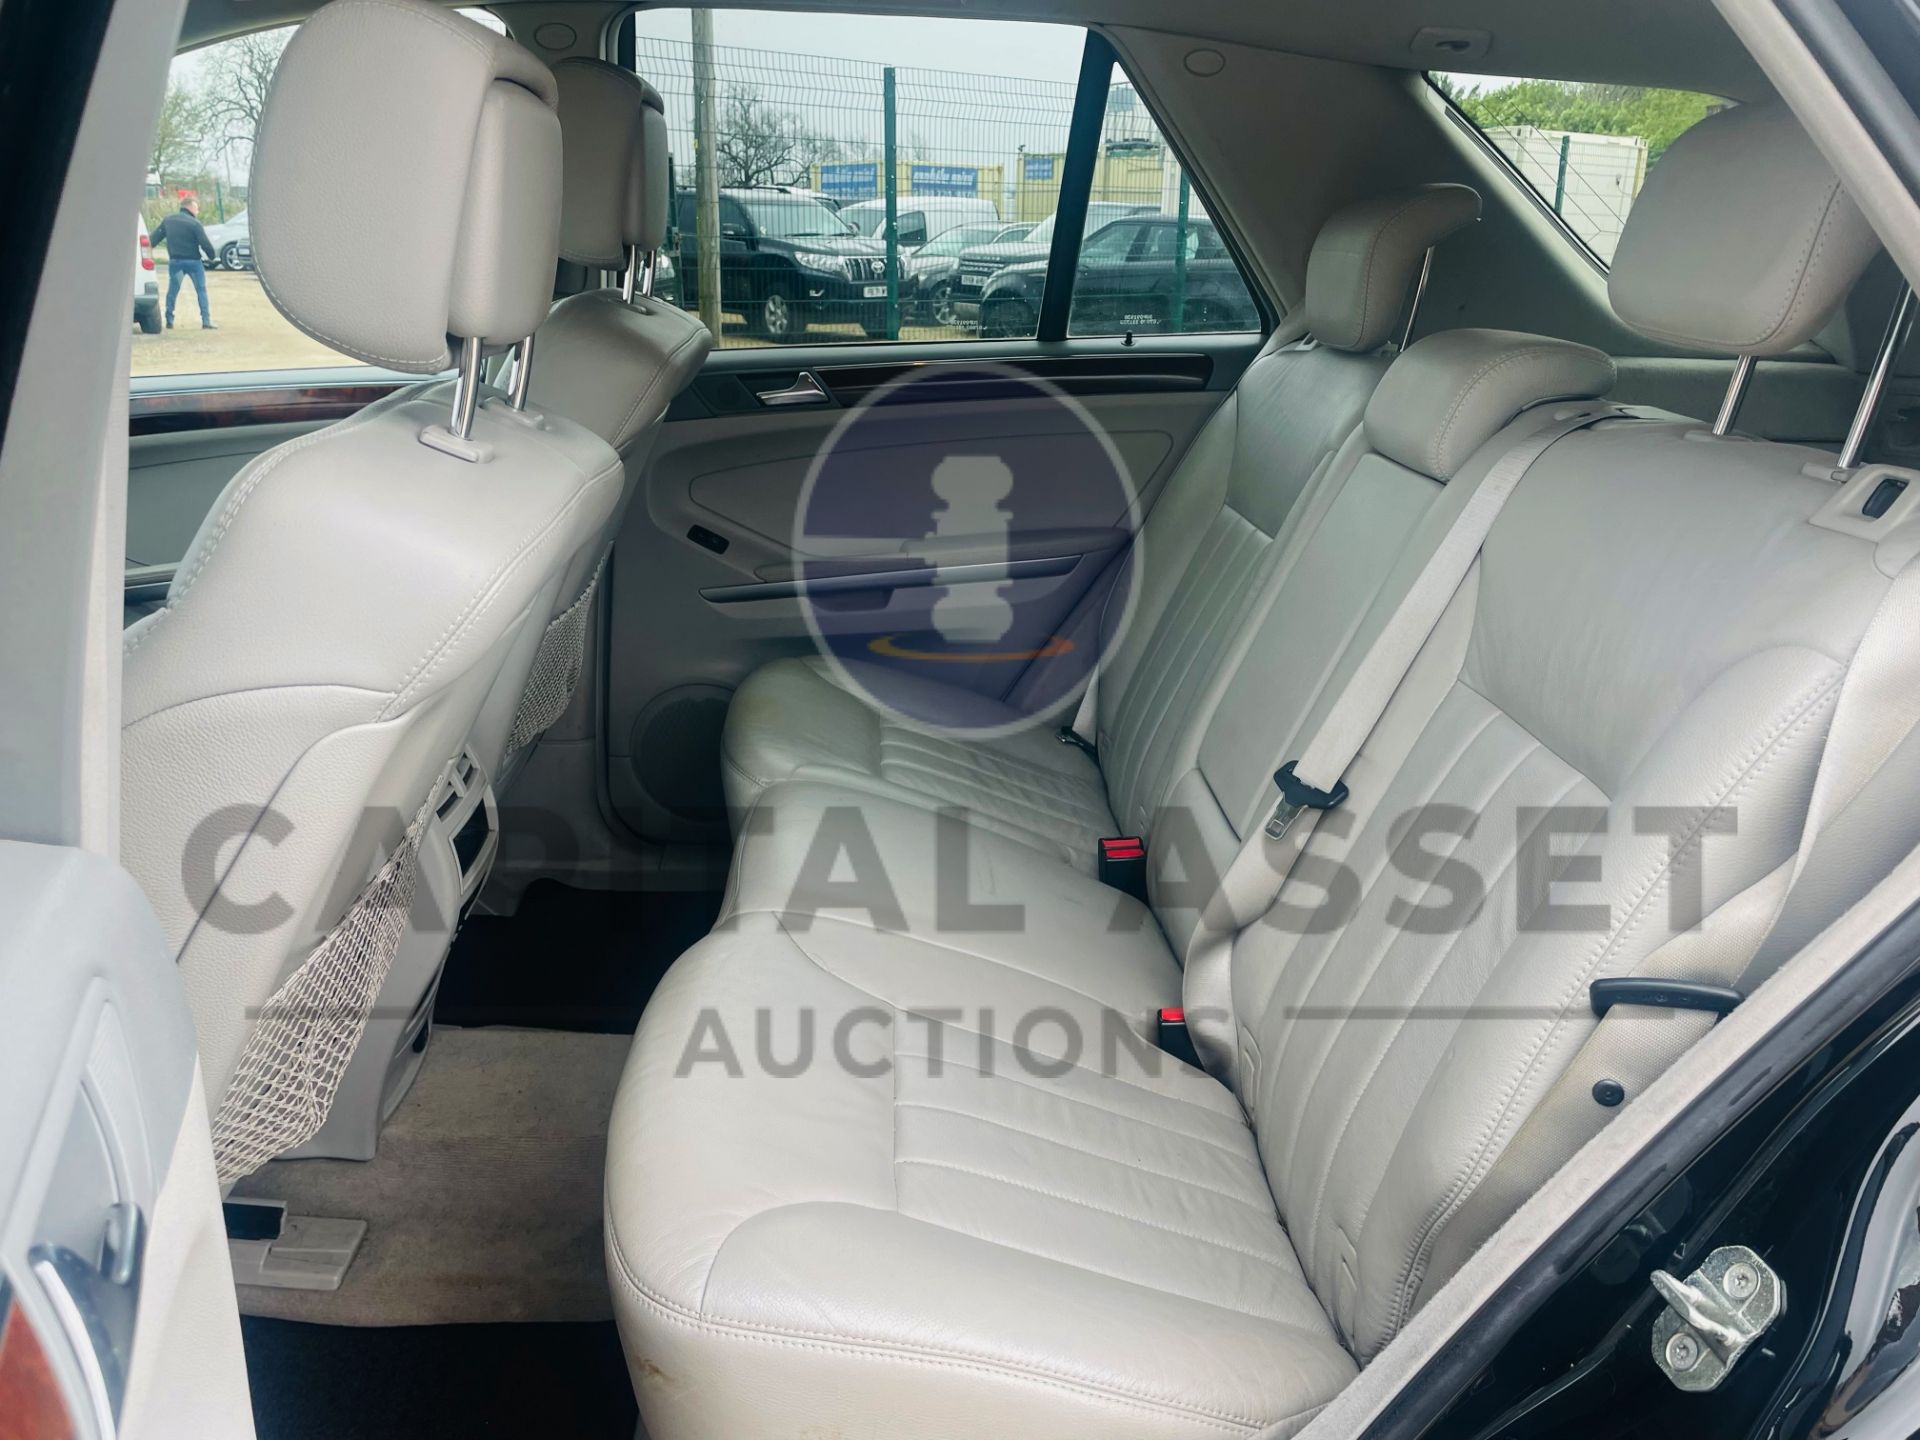 ON SALE MERCEDES-BENZ ML 320 CDI *SE EDITION* SUV (2007 MODEL) '3.0 DIESEL - AUTOMATIC' *LEATHER - Image 27 of 49